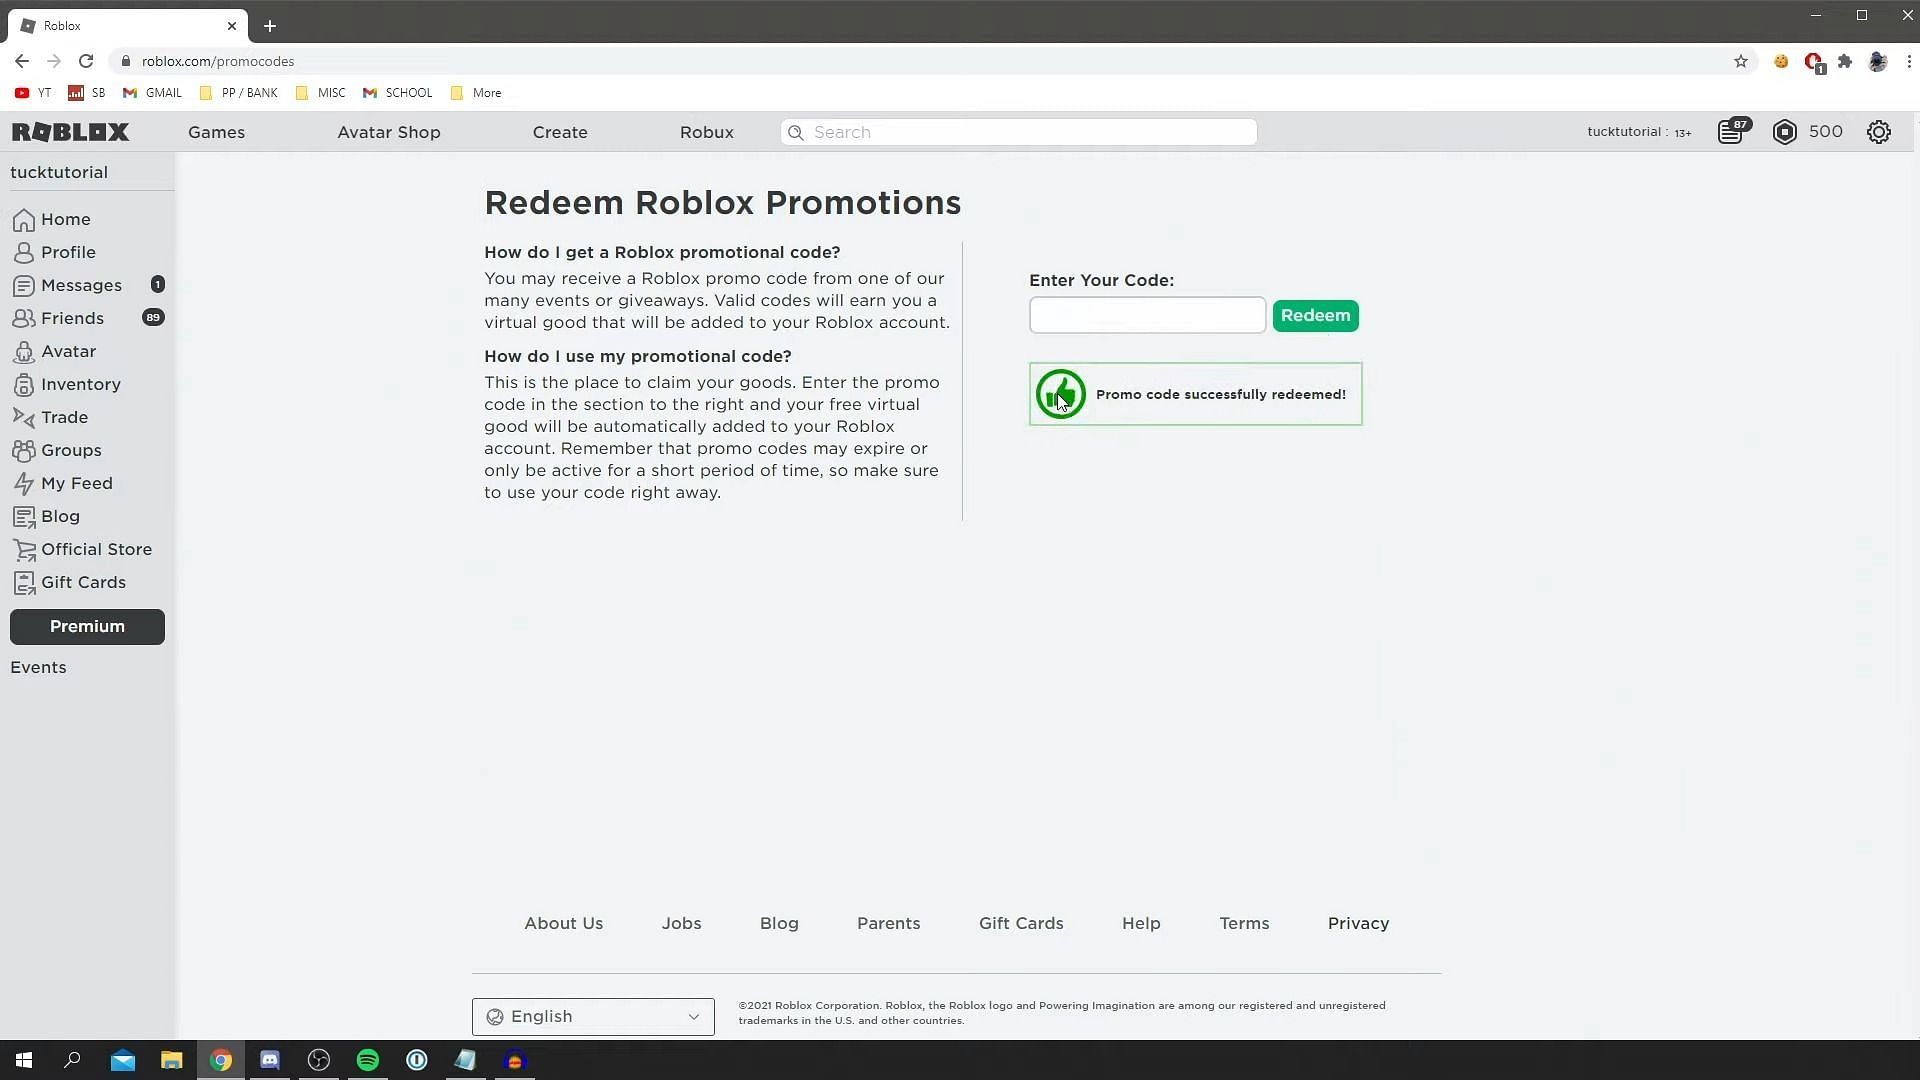 Roblox Robux Code Redeem Page Official 2022 - (www roblox com redeem)